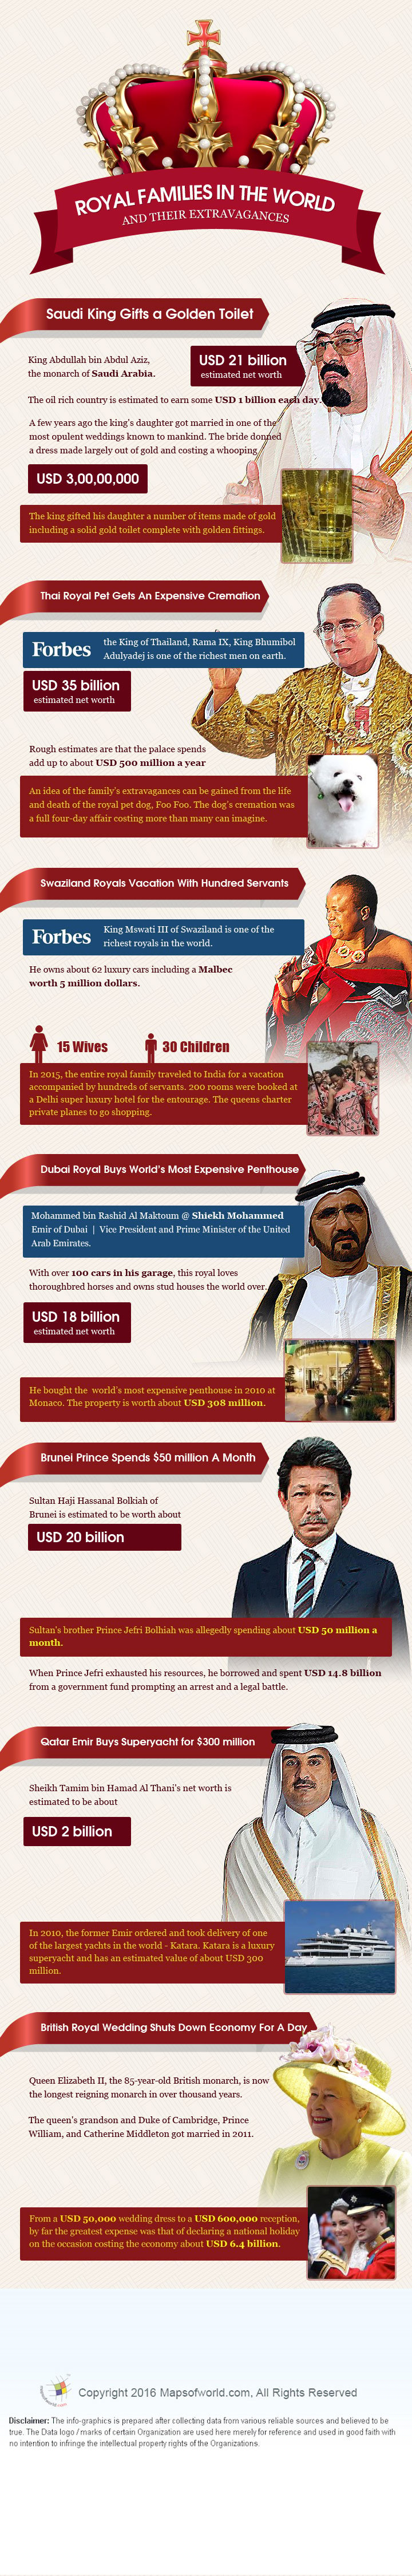 Royal Families in the World and Their Extravagance infographic